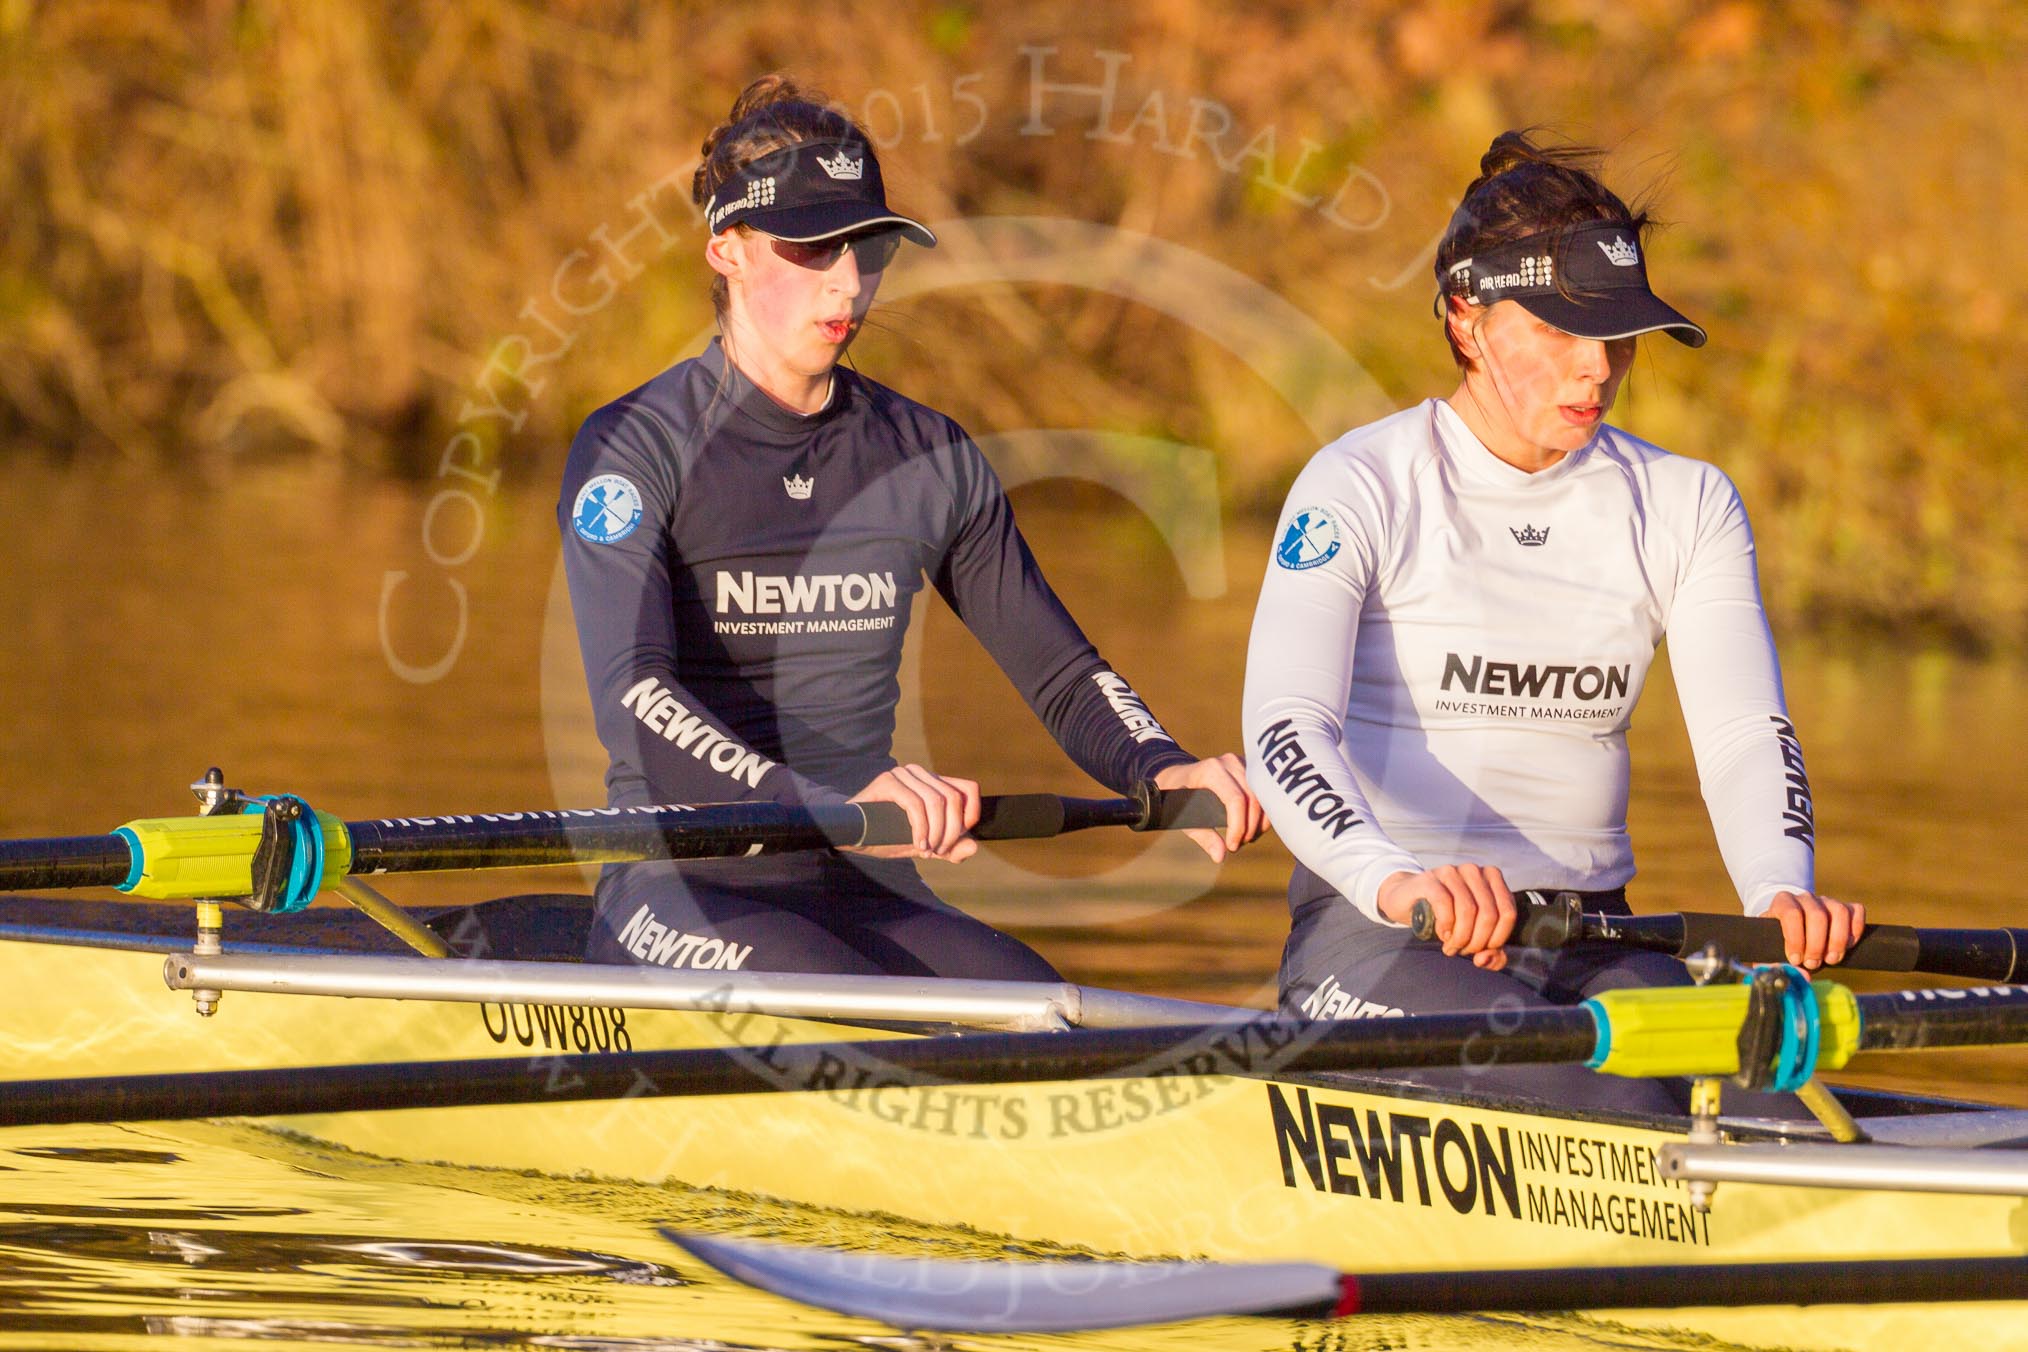 The Boat Race season 2015: OUWBC training Wallingford.

Wallingford,

United Kingdom,
on 04 March 2015 at 17:10, image #260